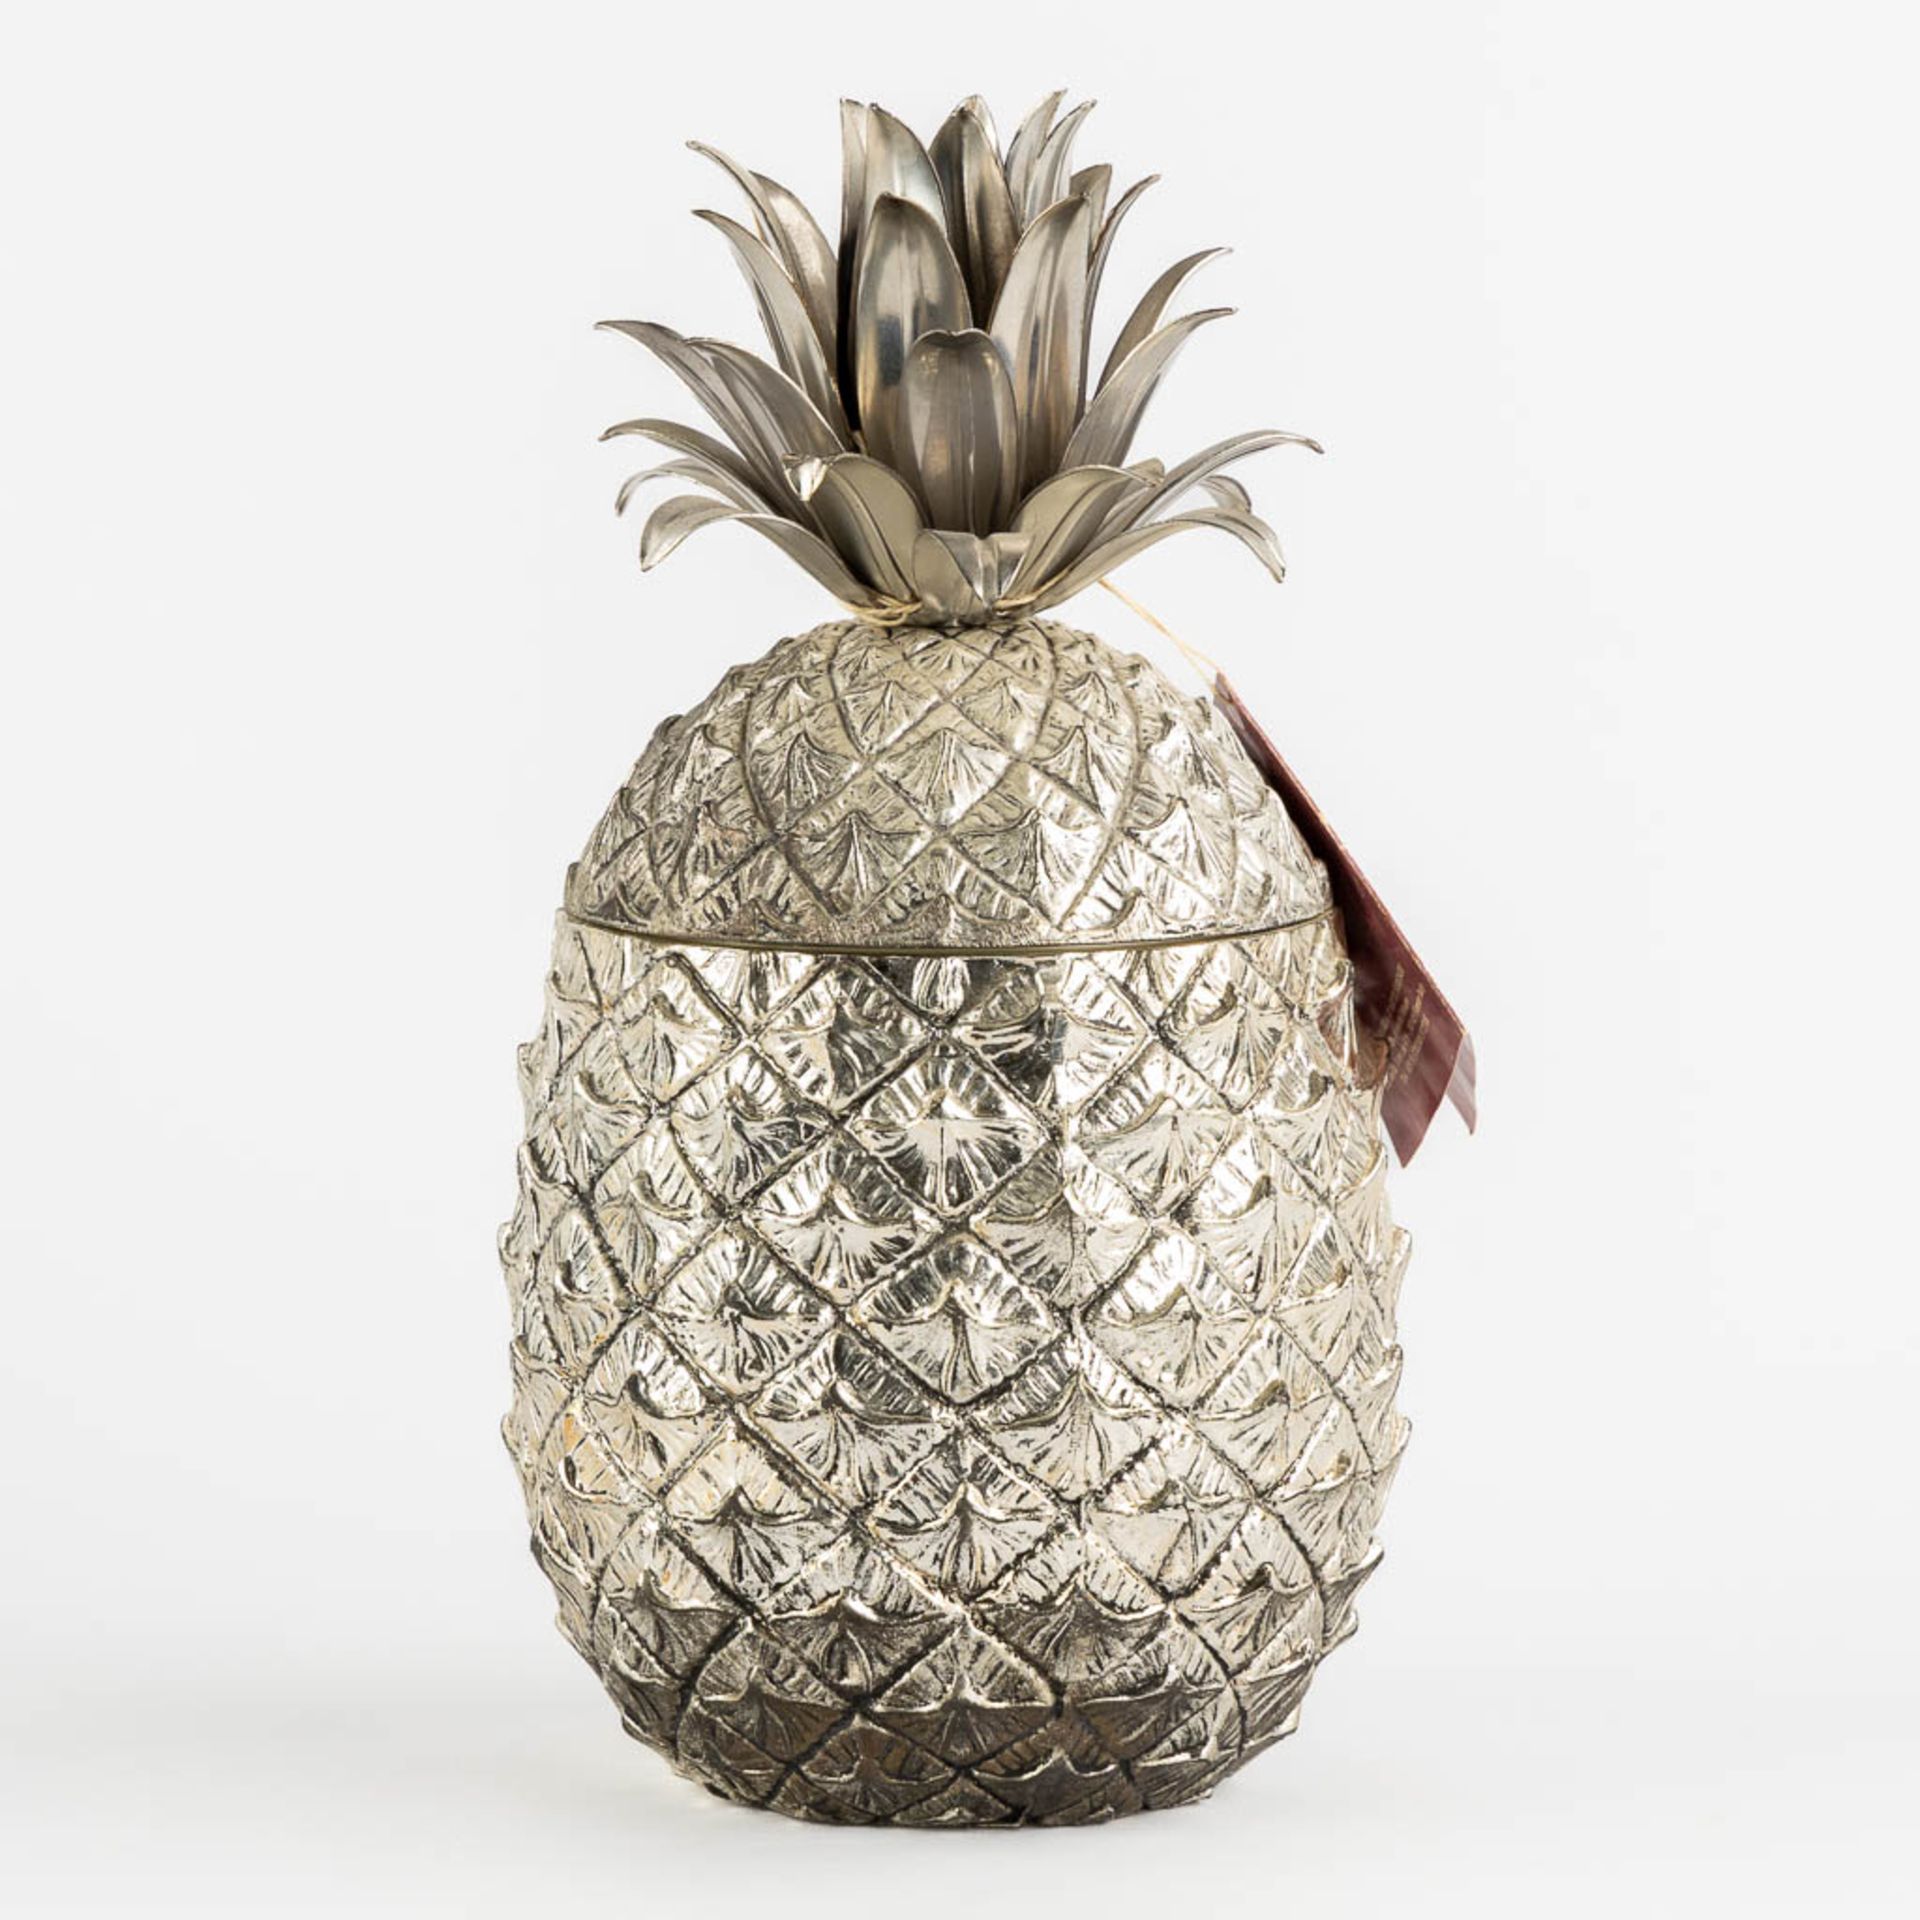 Mauro MANETTI (XX) 'Pineapple' an ice pail. (H:24 x D:13 cm) - Image 3 of 11